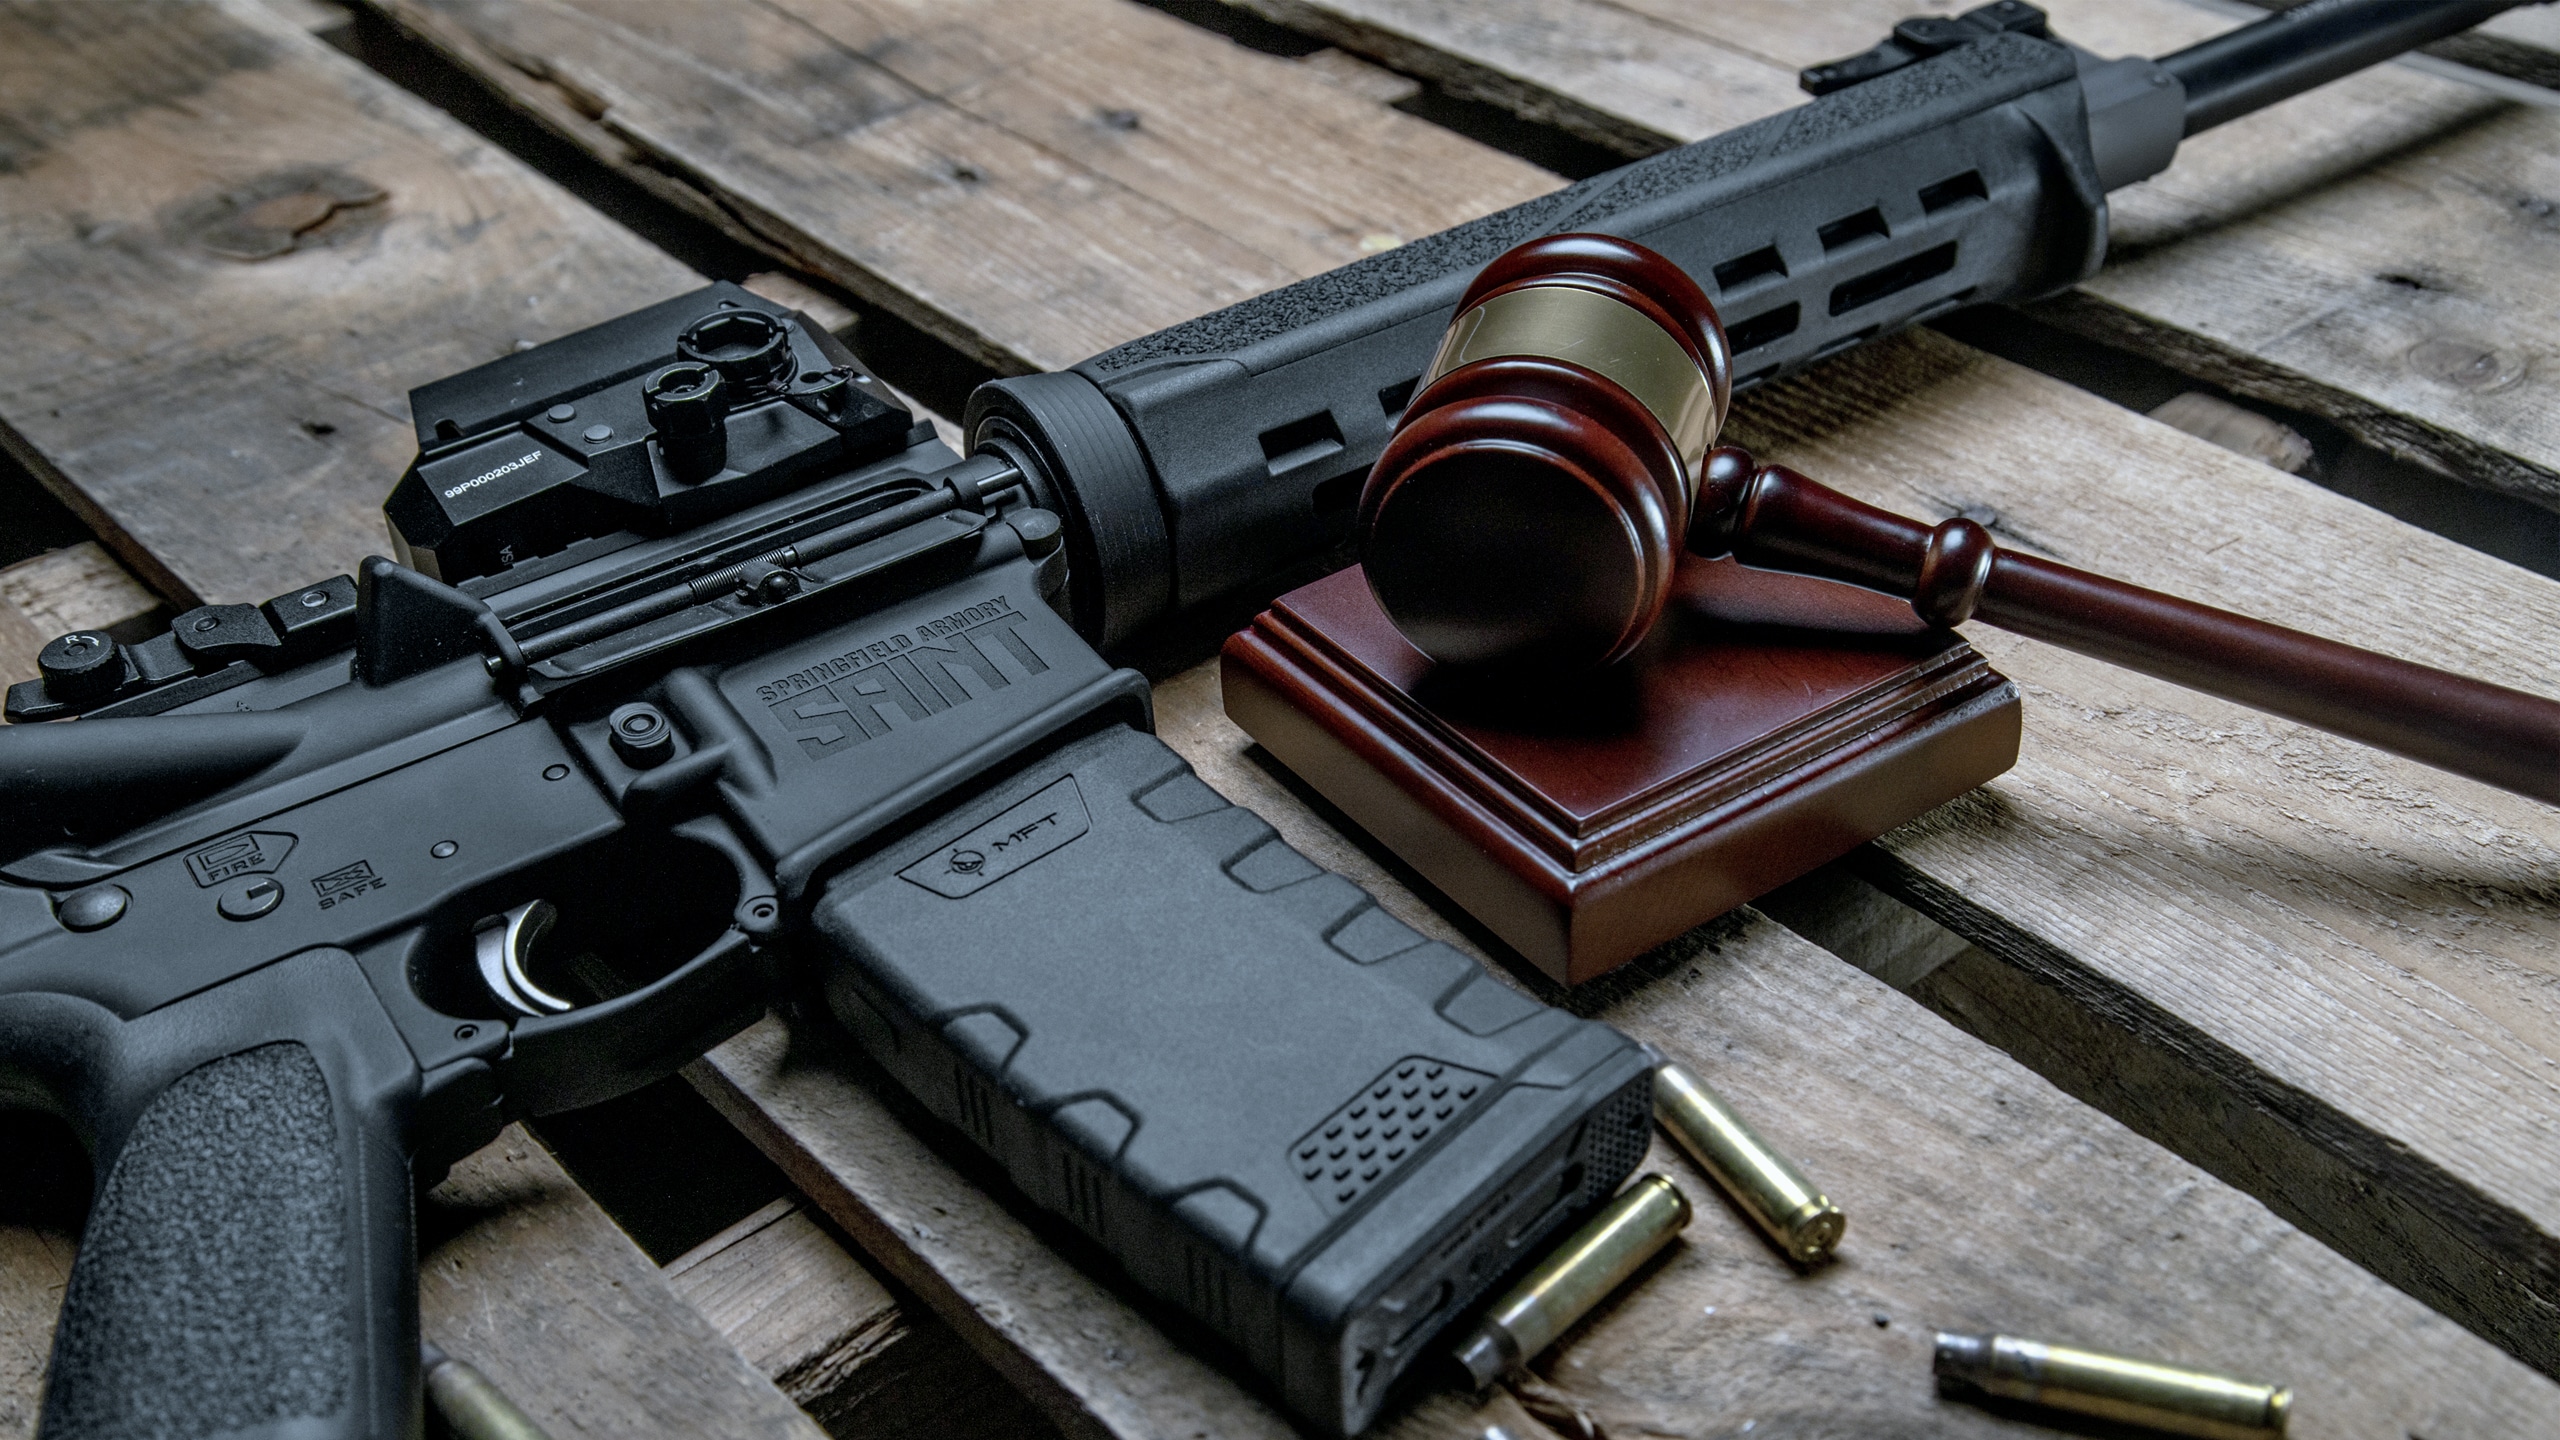 Self-Defense and the Law: Tactical & Legal, Part 2 - The Armory Life